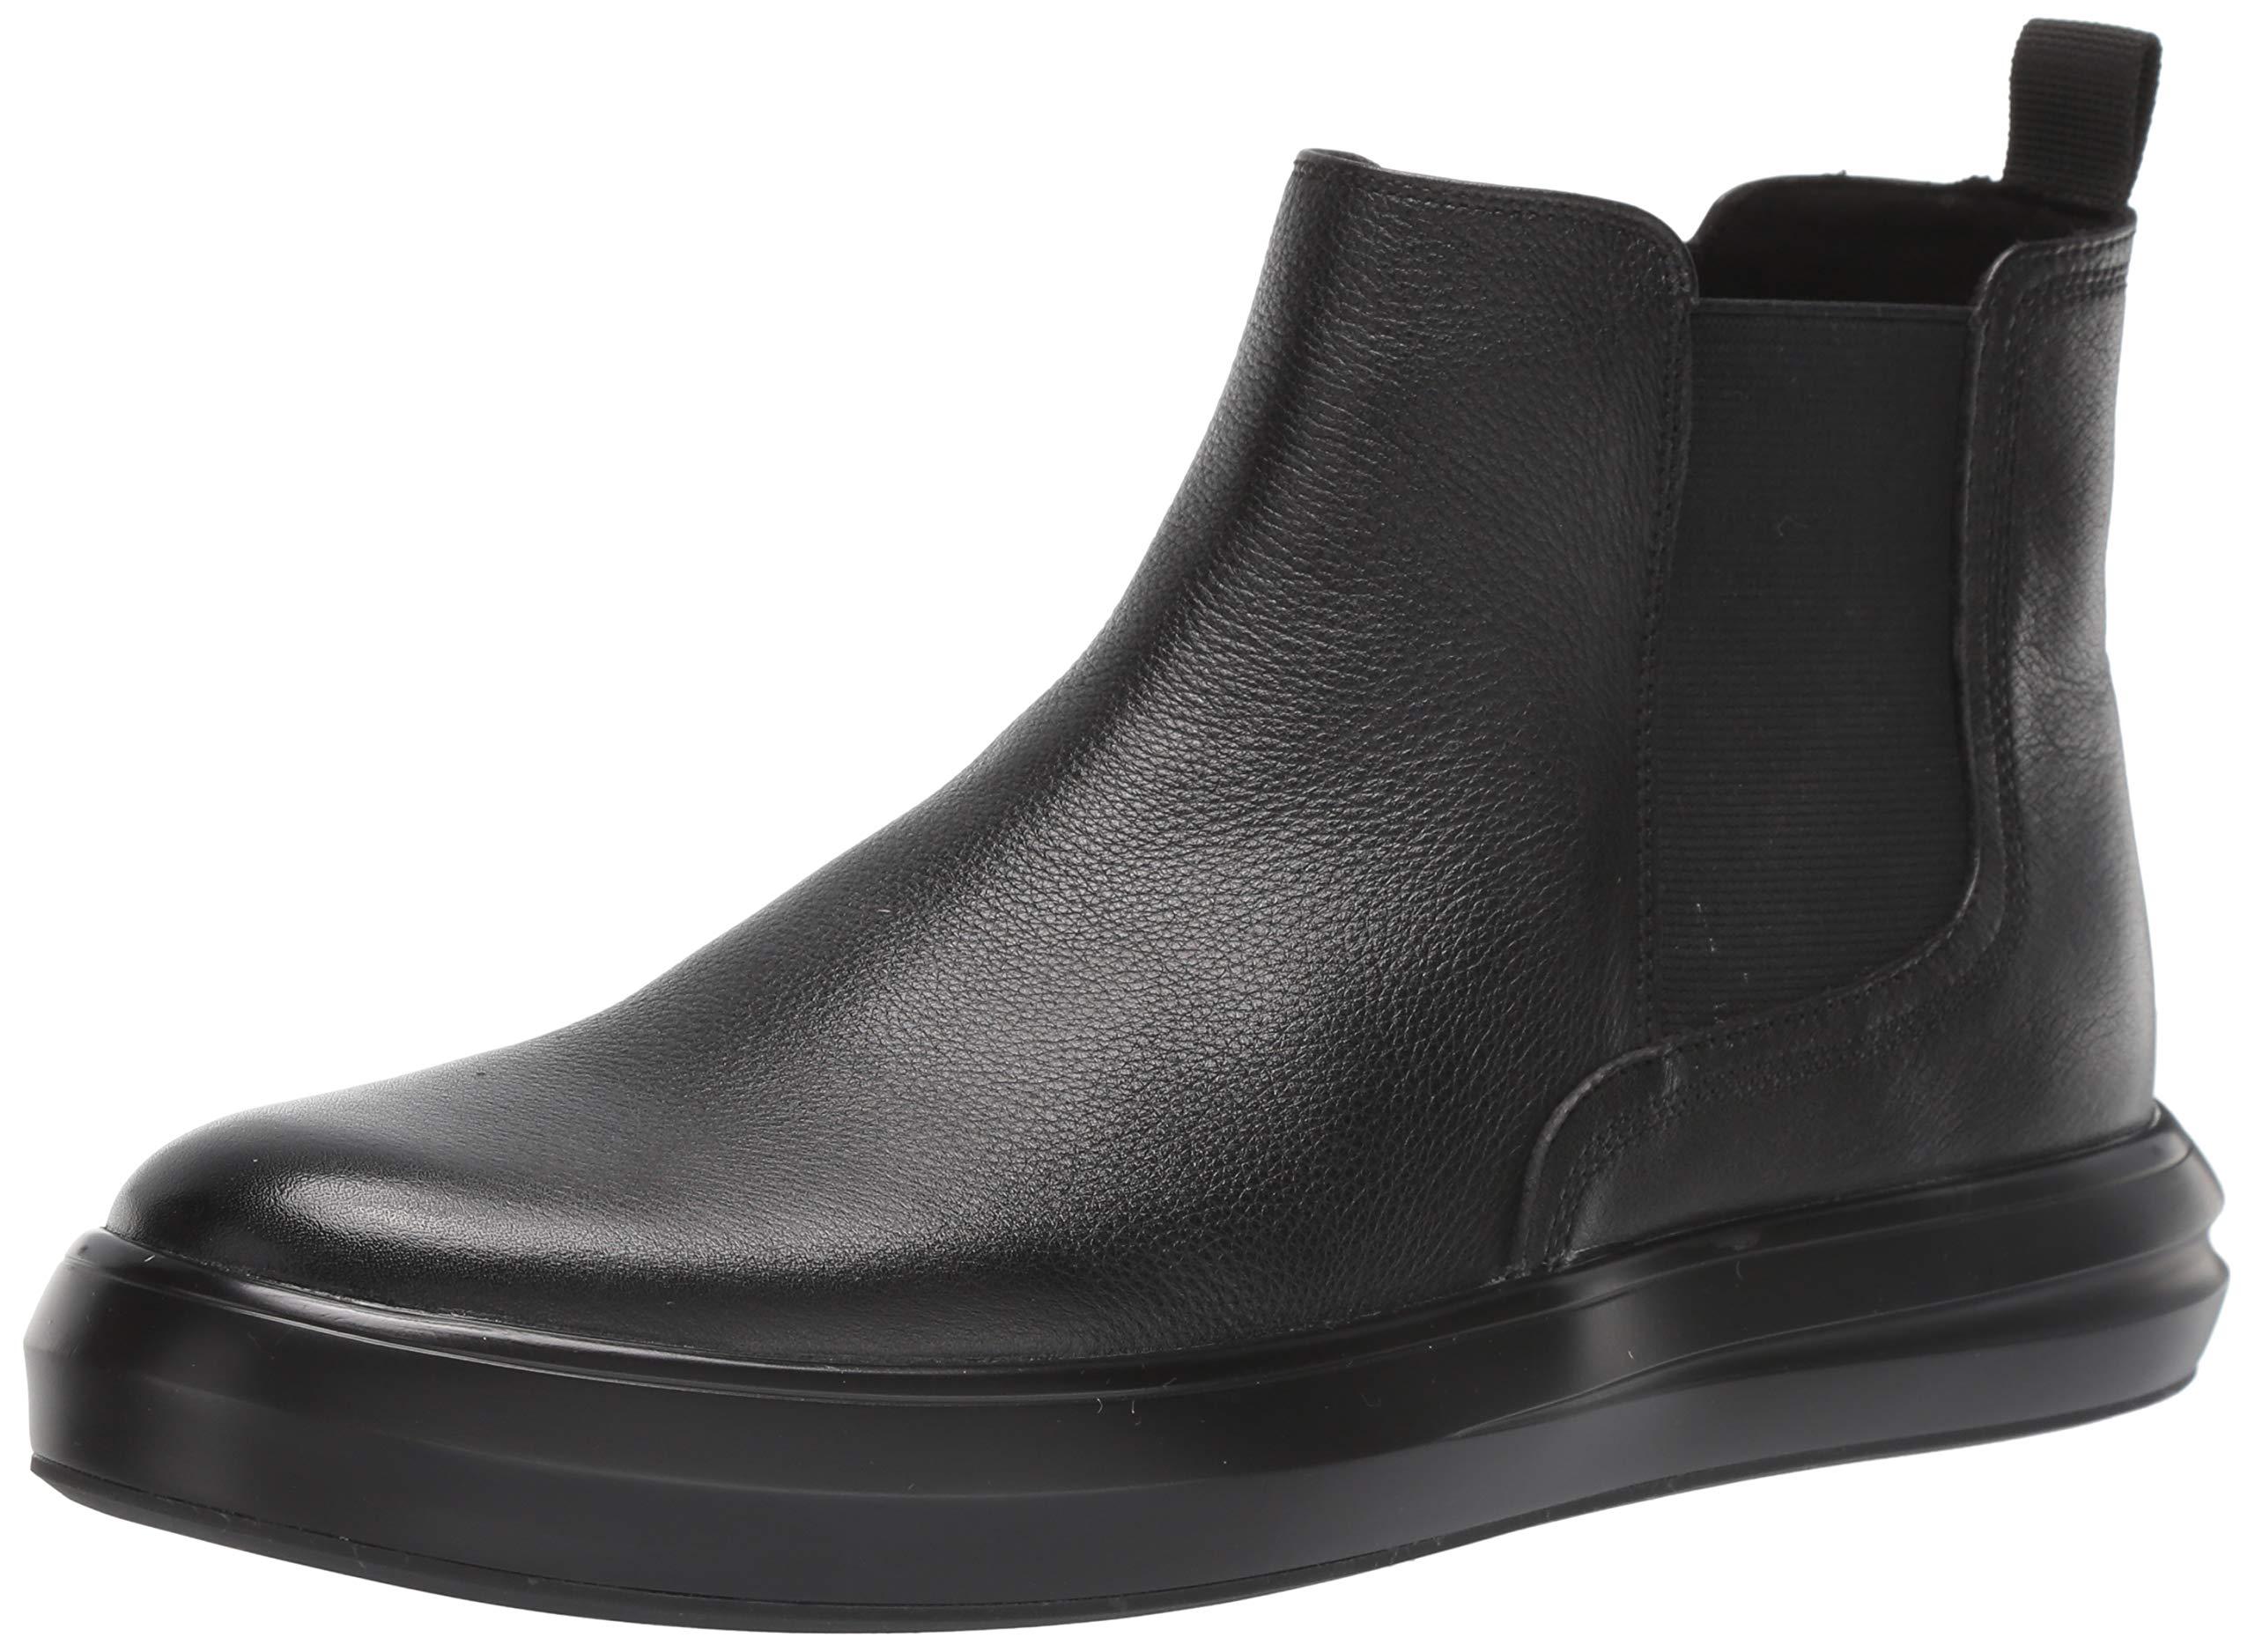 Kenneth Cole New York Mens The Mover Chelsea Hybrid Boot